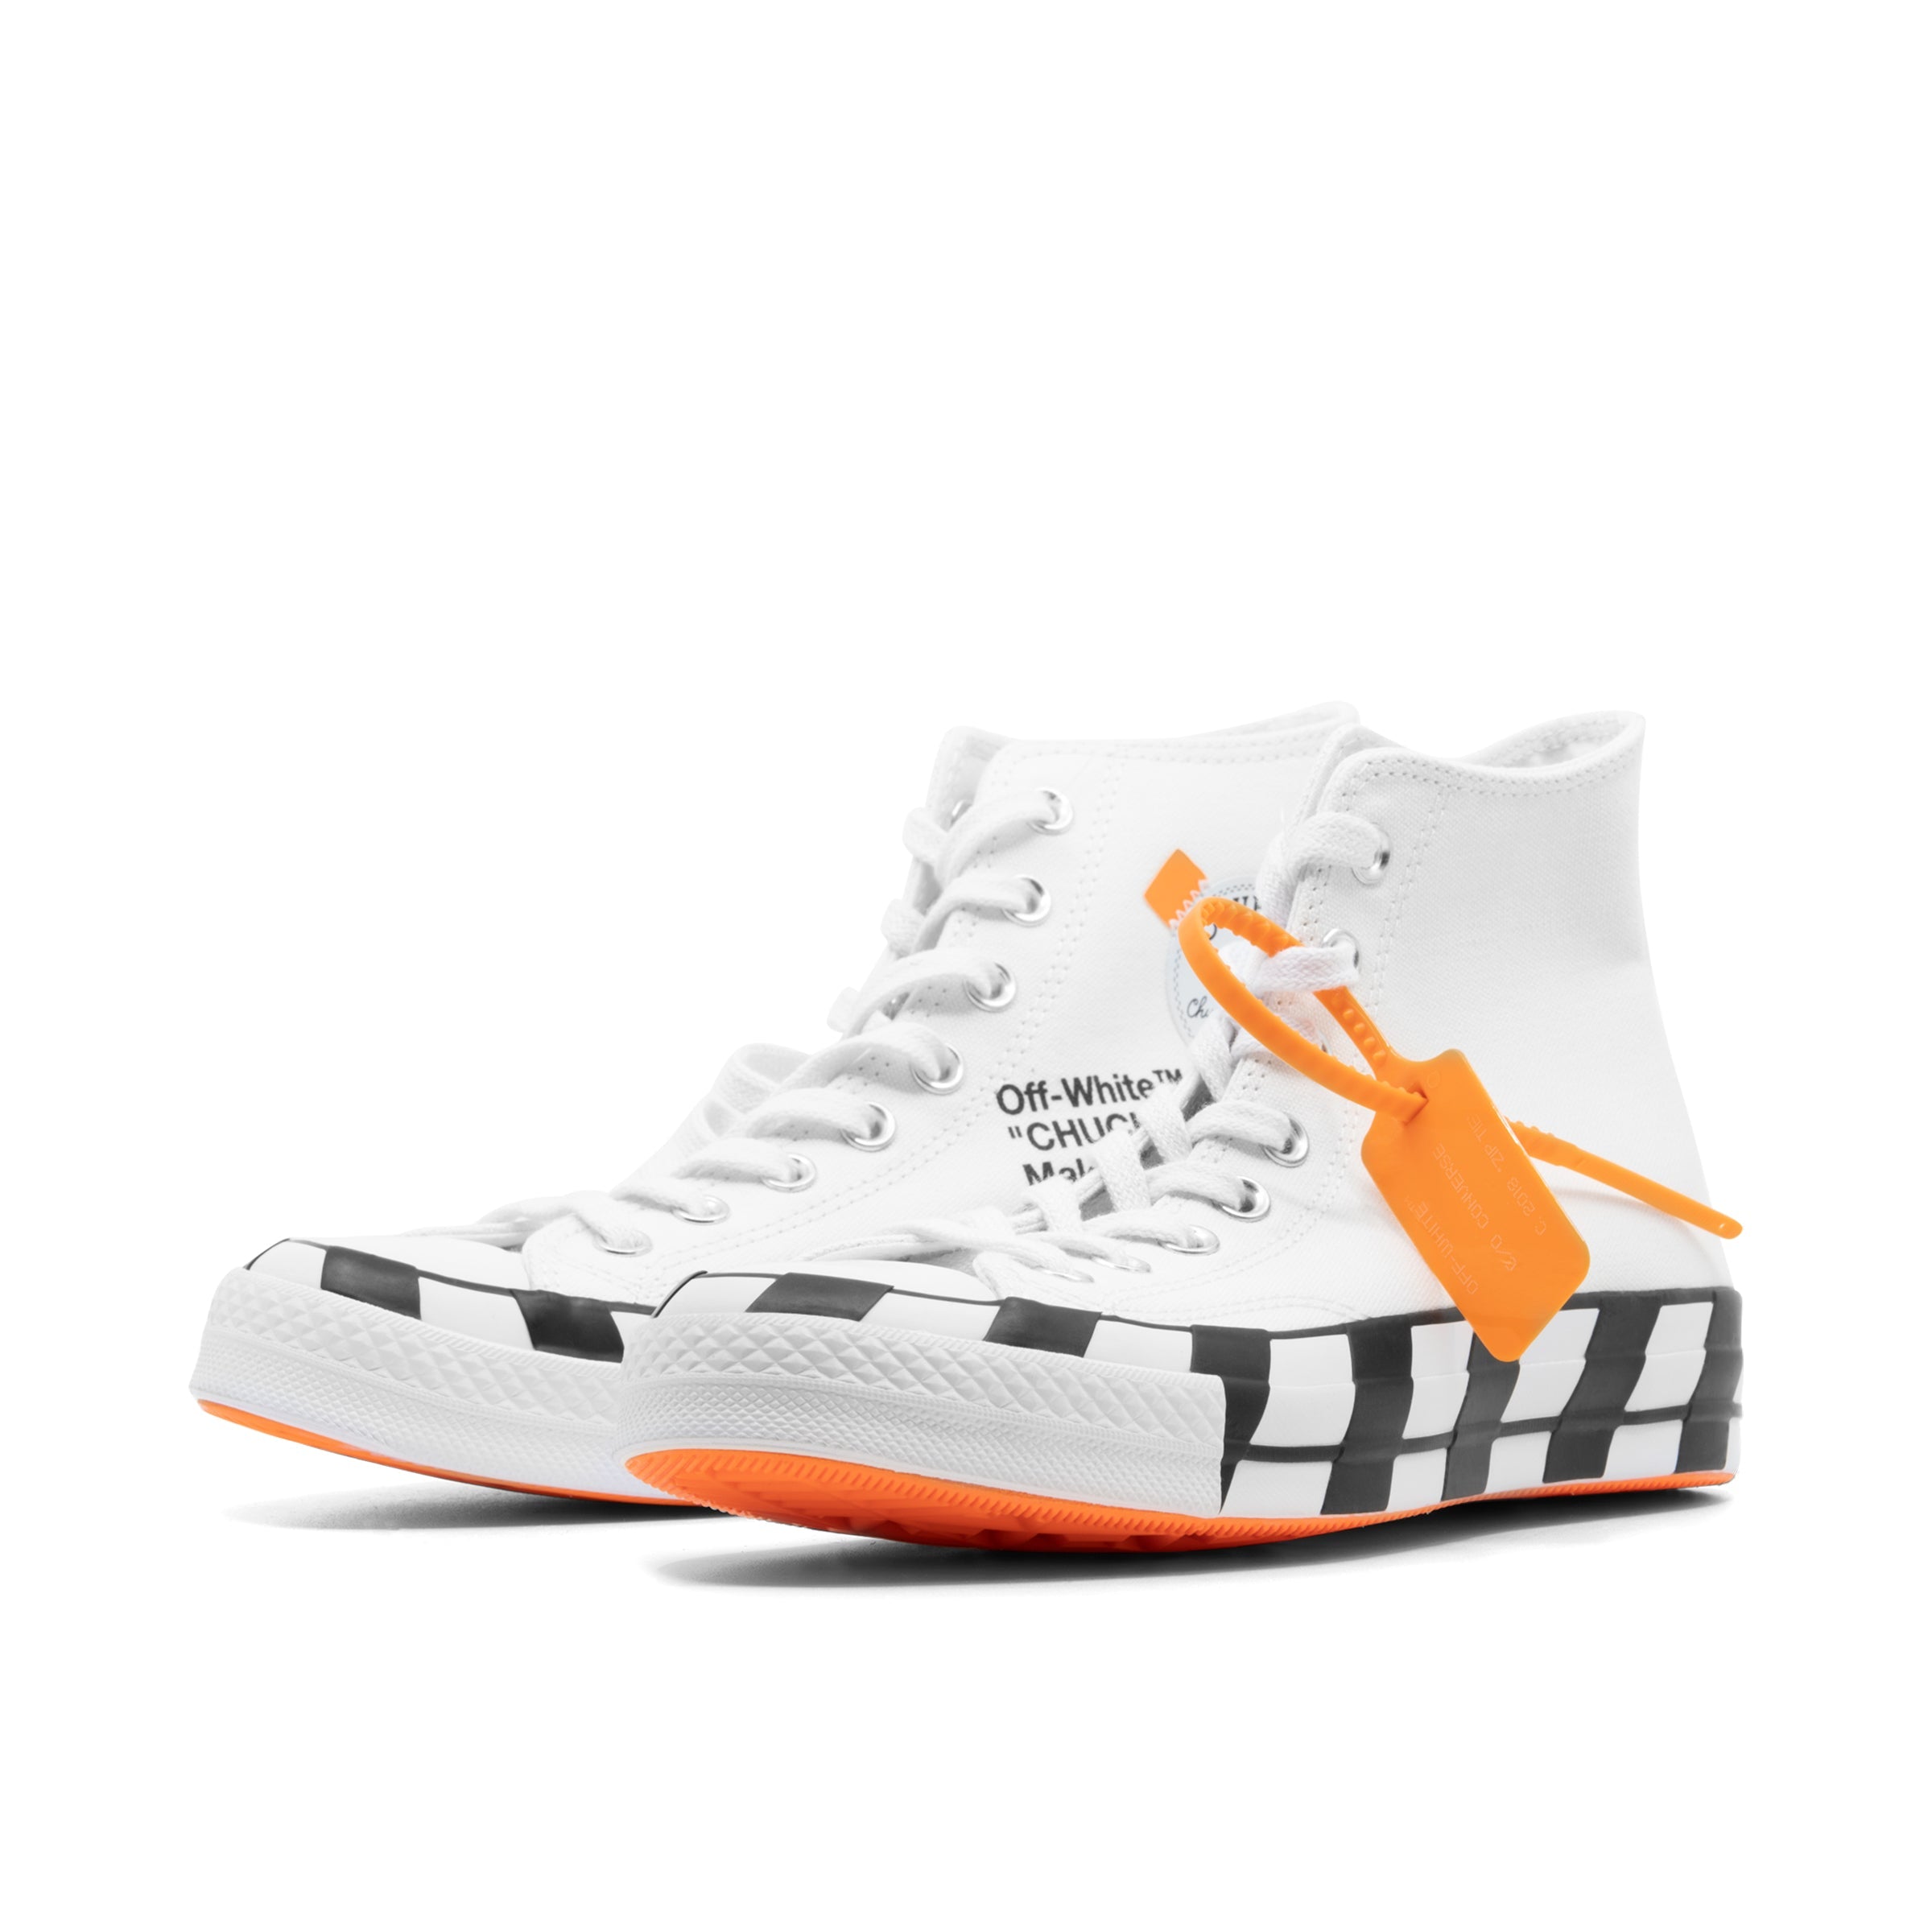 CONVERSE CHUCK TAYLOR ALL-STAR 70 OFF-WHITE